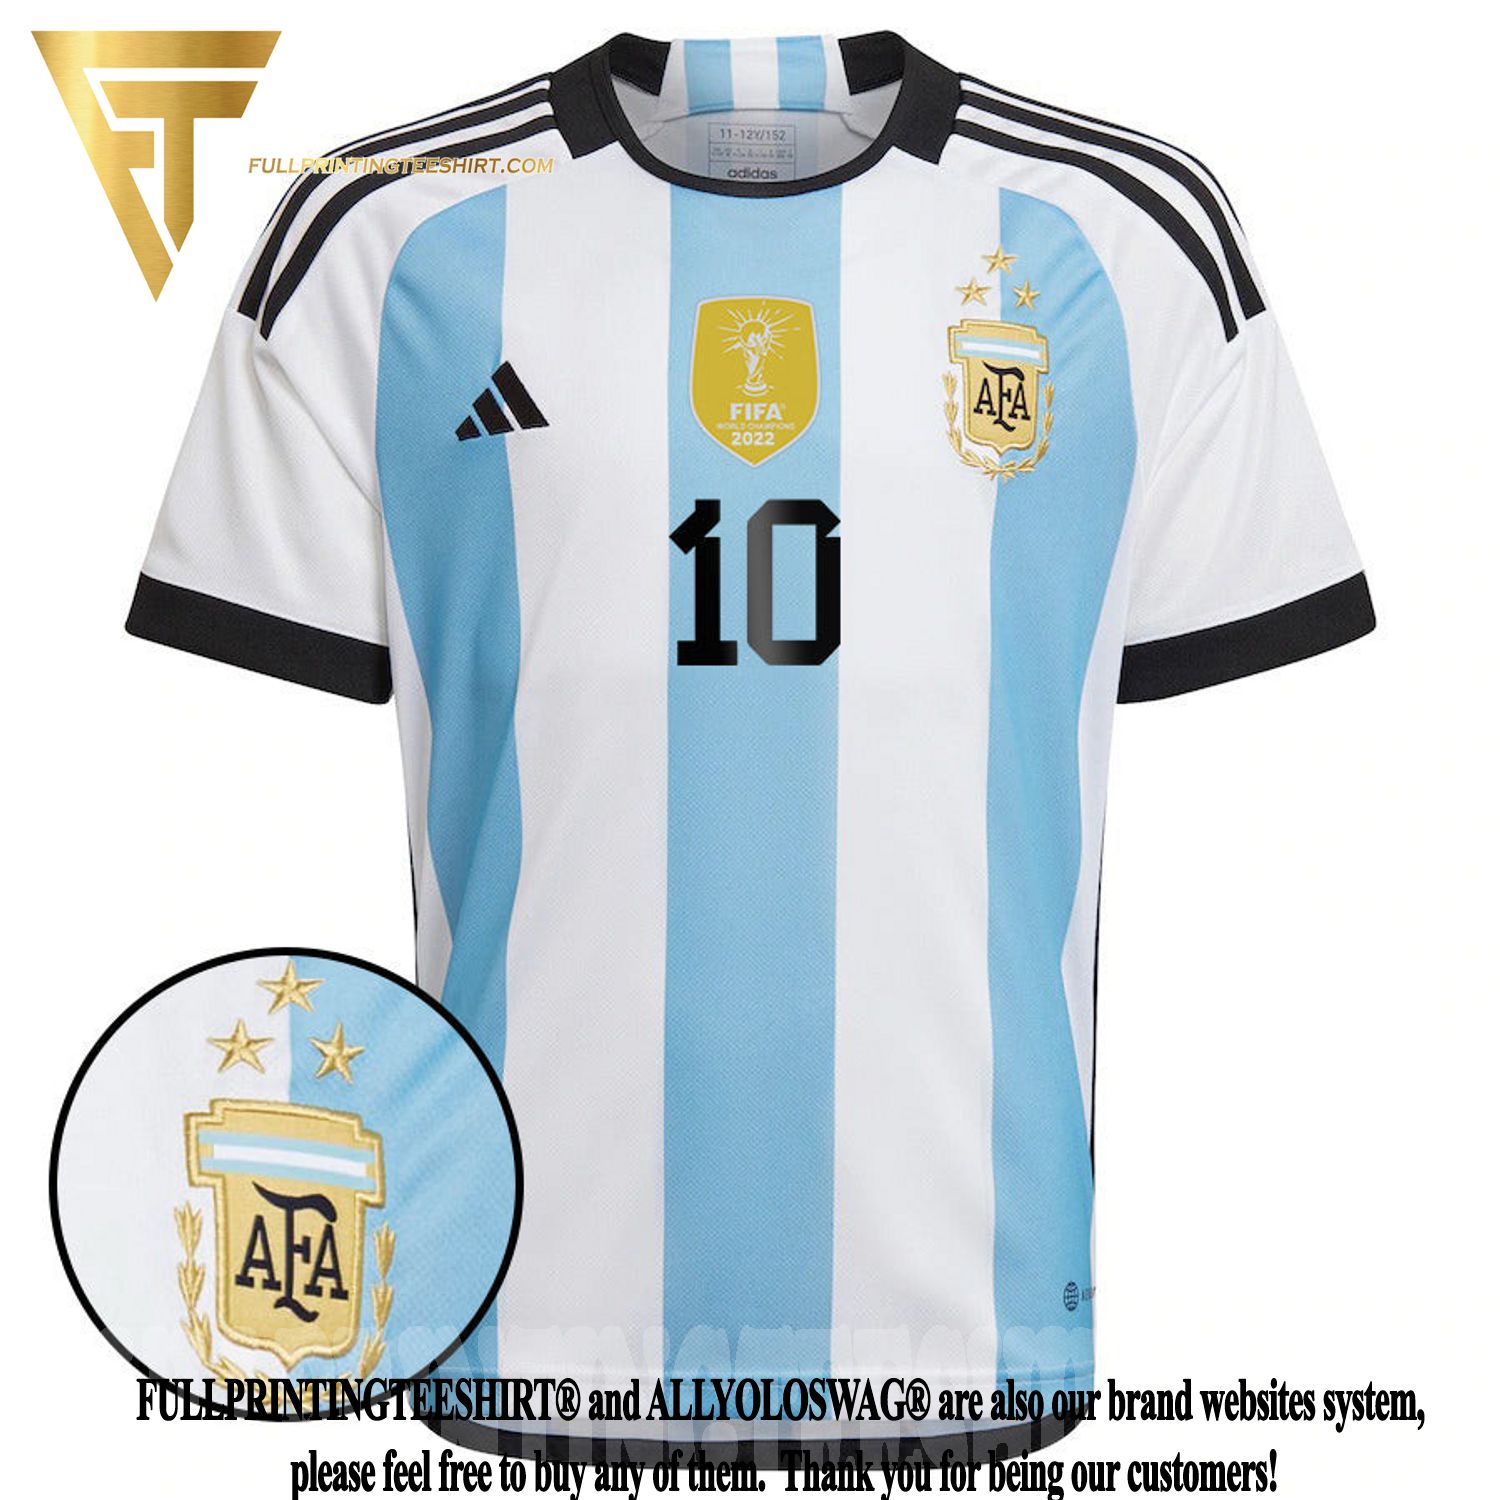 messi jersey with 3 stars